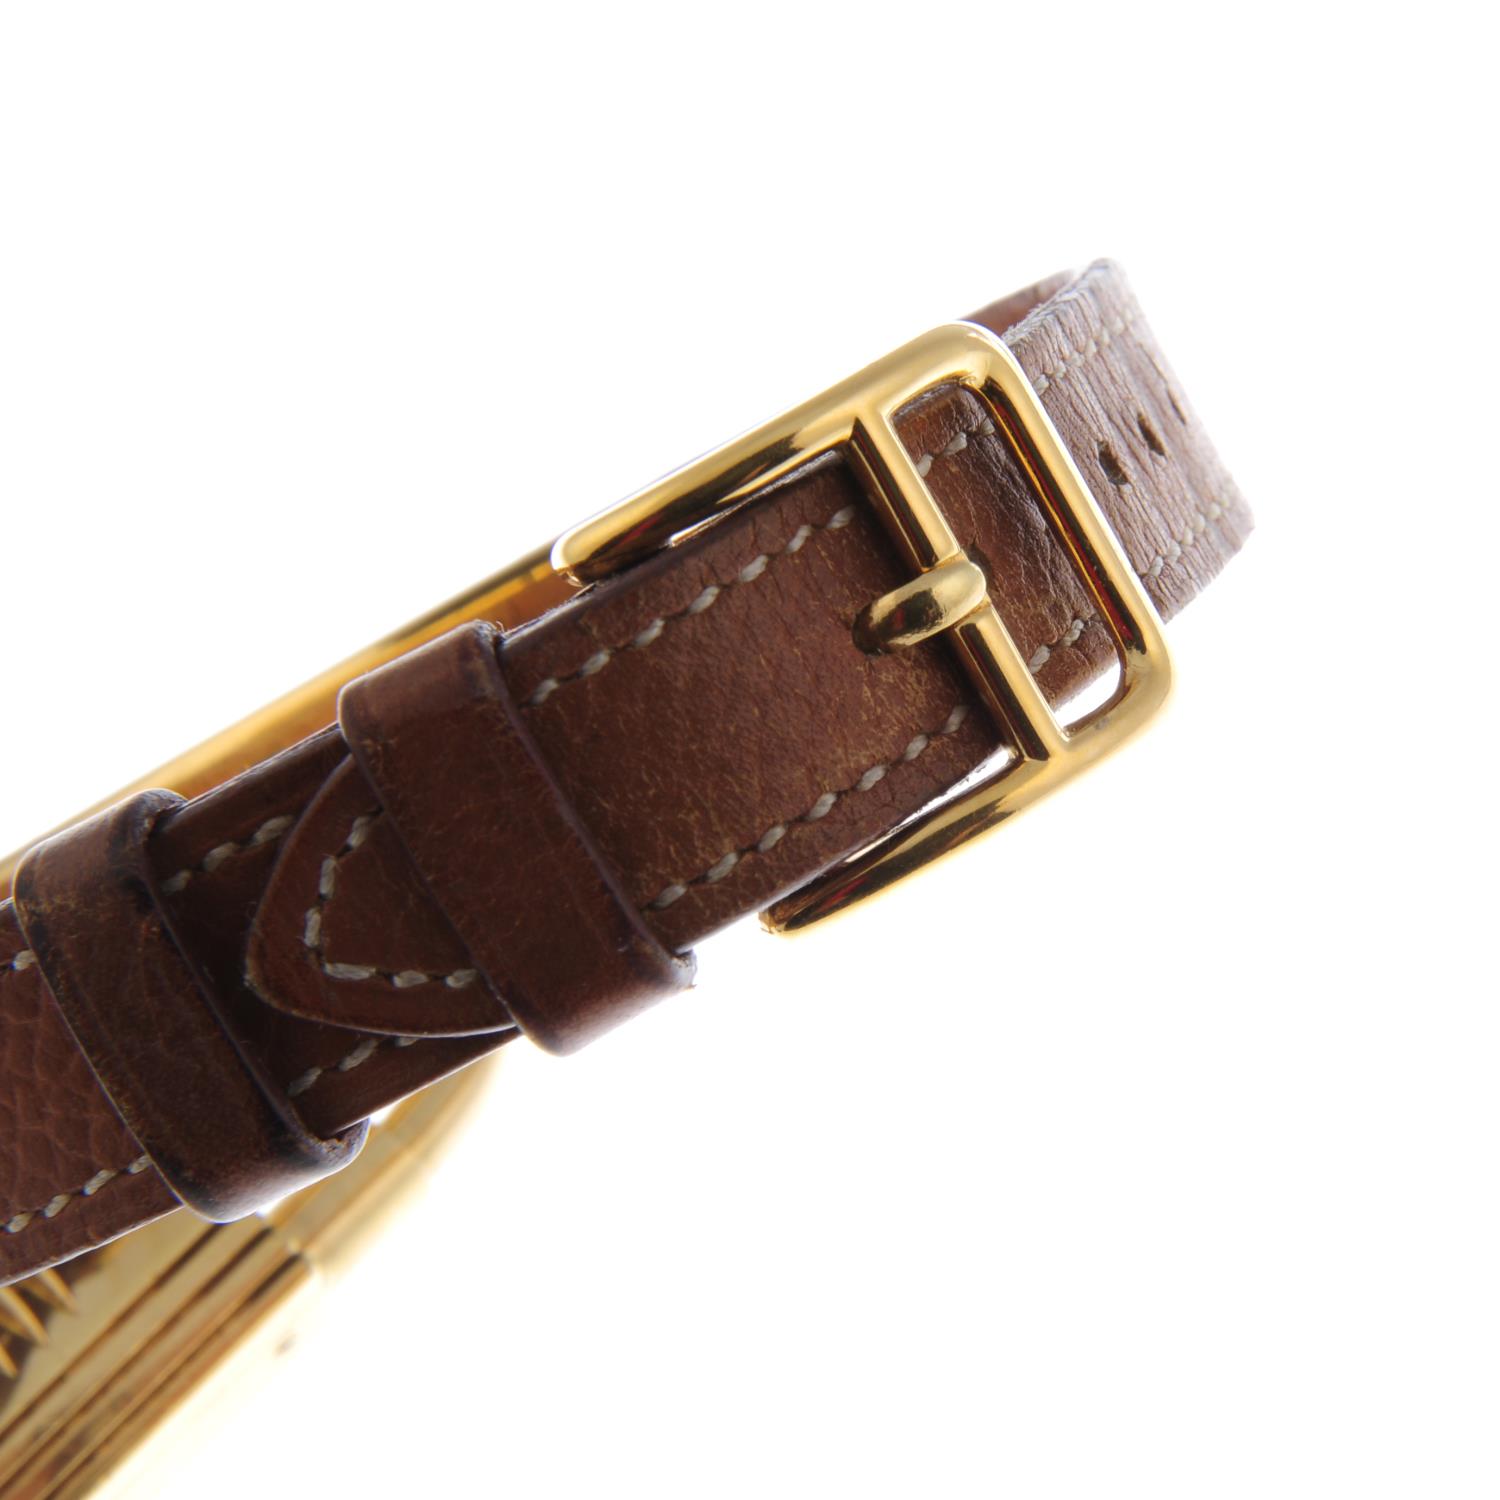 HERMÈS - a lady's Kelly wrist watch. Gold plated case. Reference KE1.201 39.01, serial 823677. - Image 4 of 5